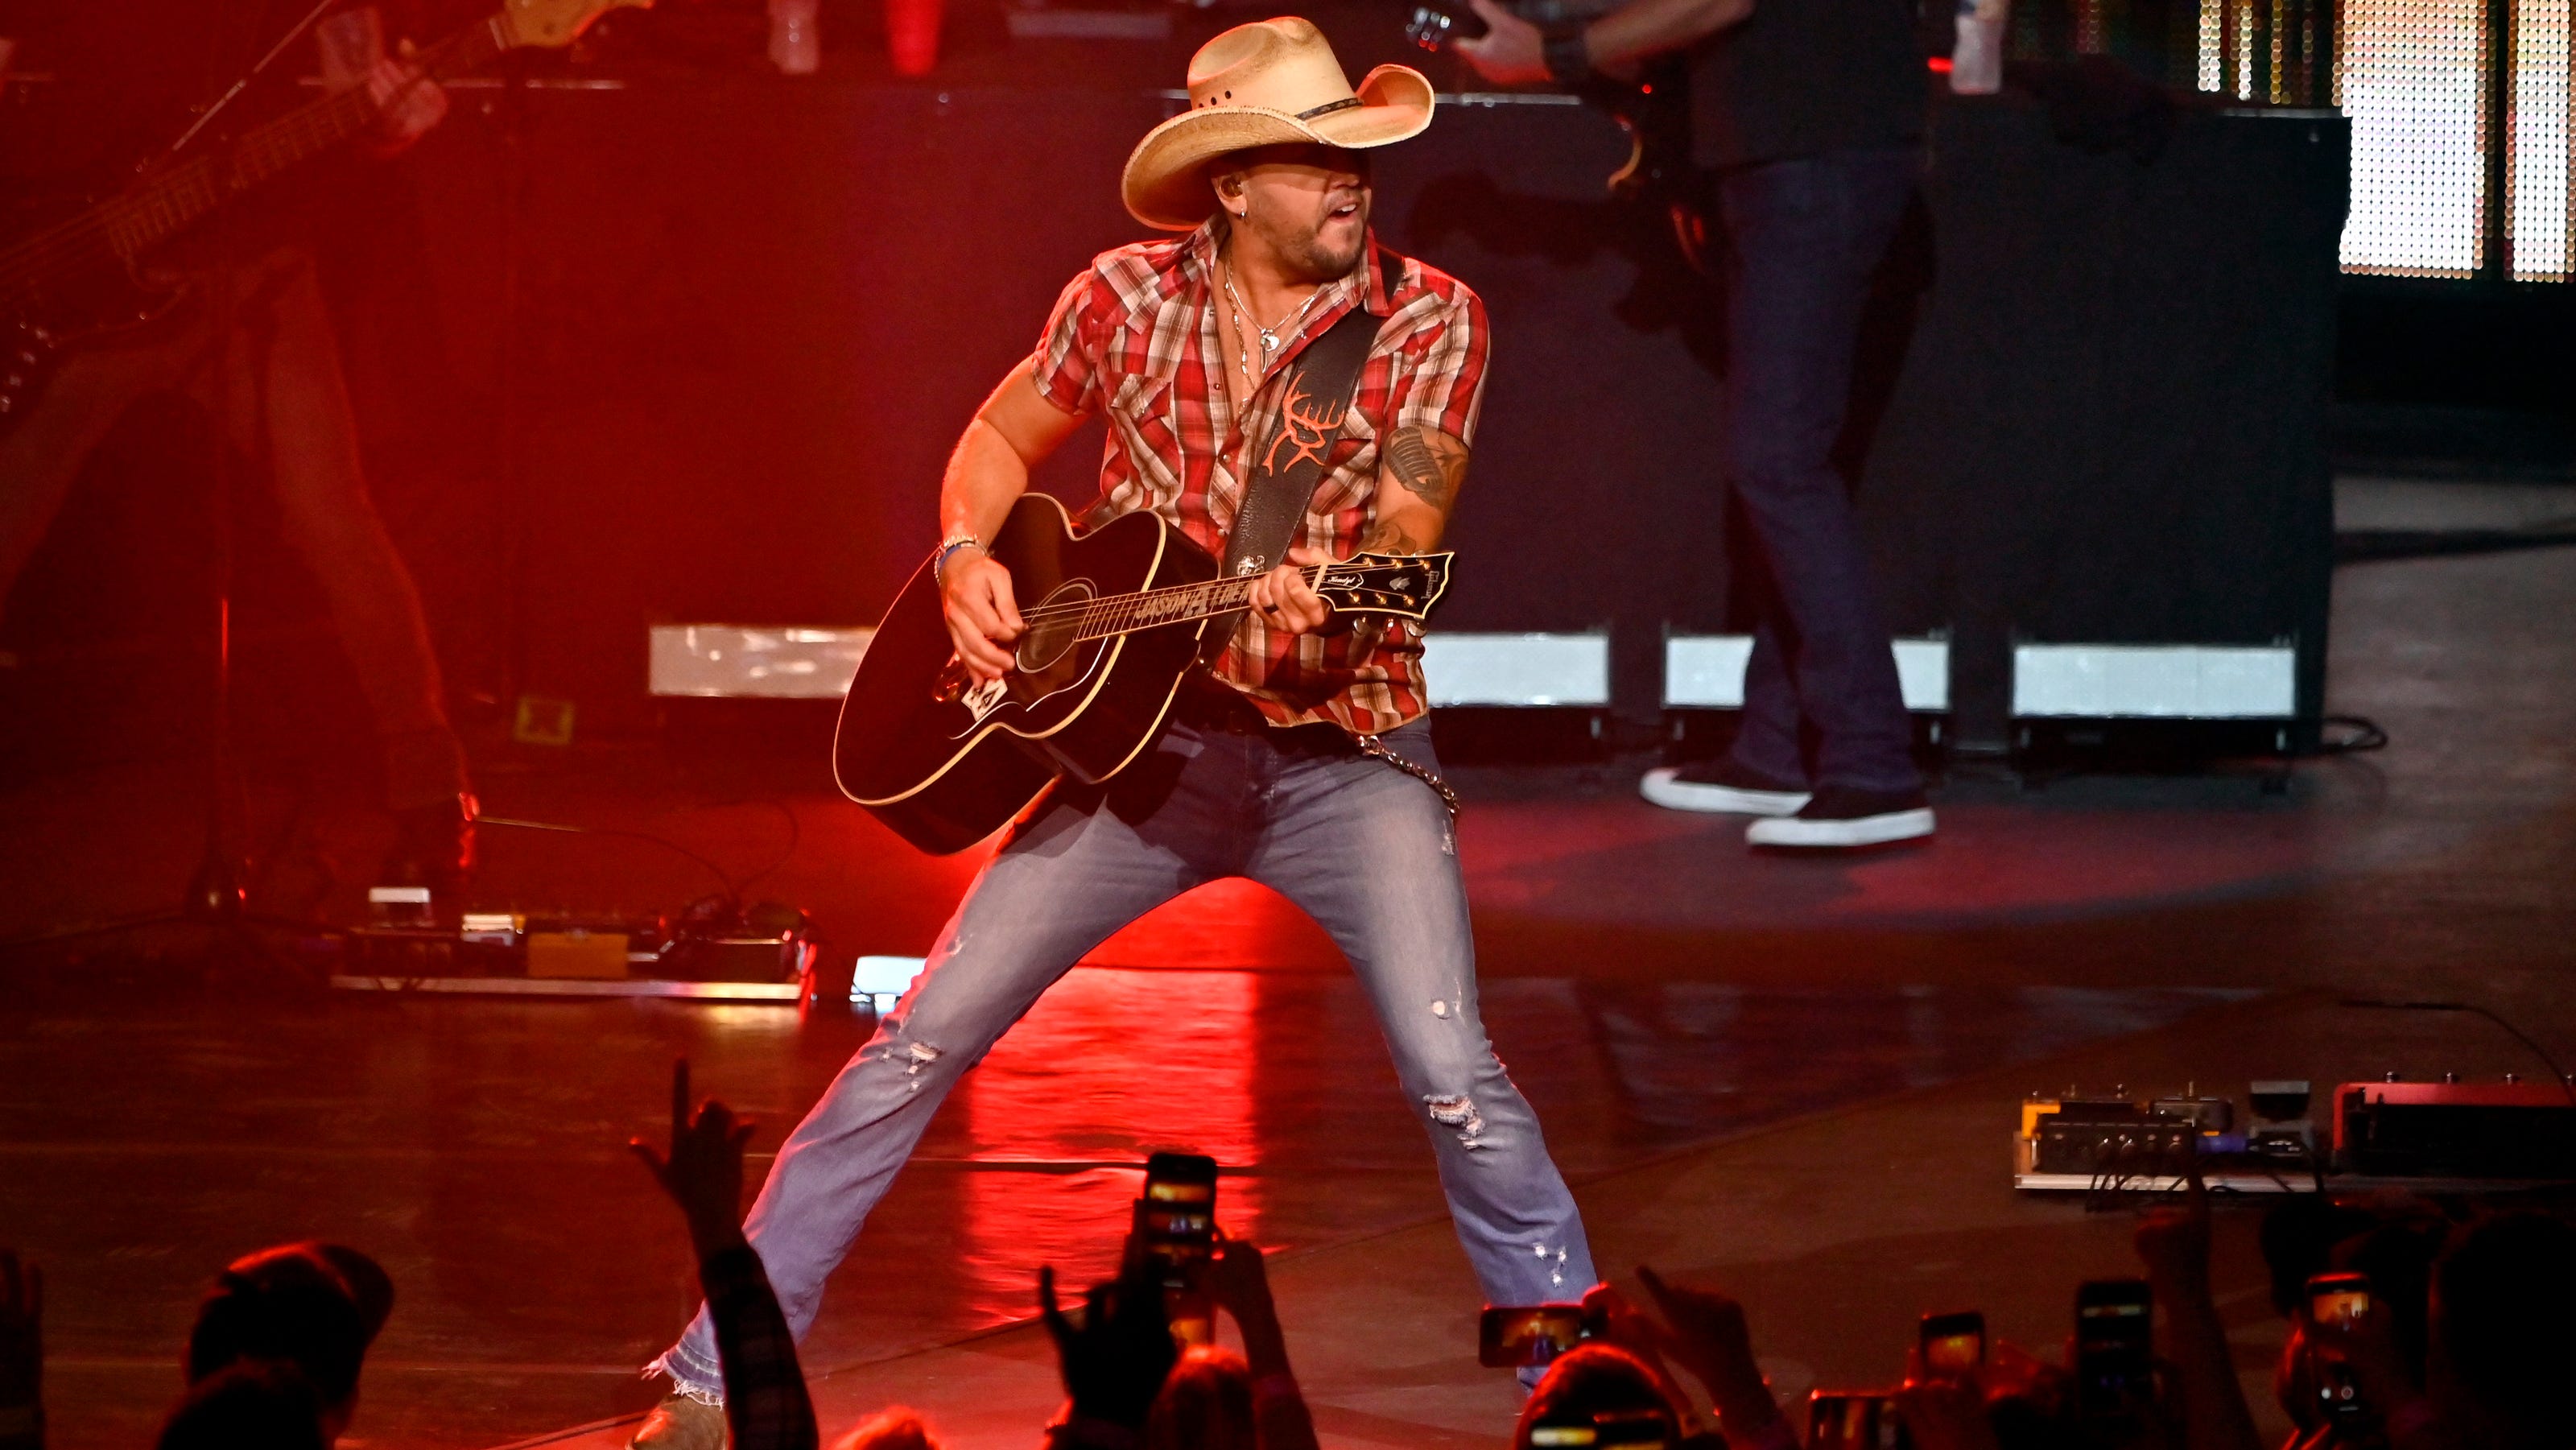 Jason Aldean on 'rough' time coping with Las Vegas shooting